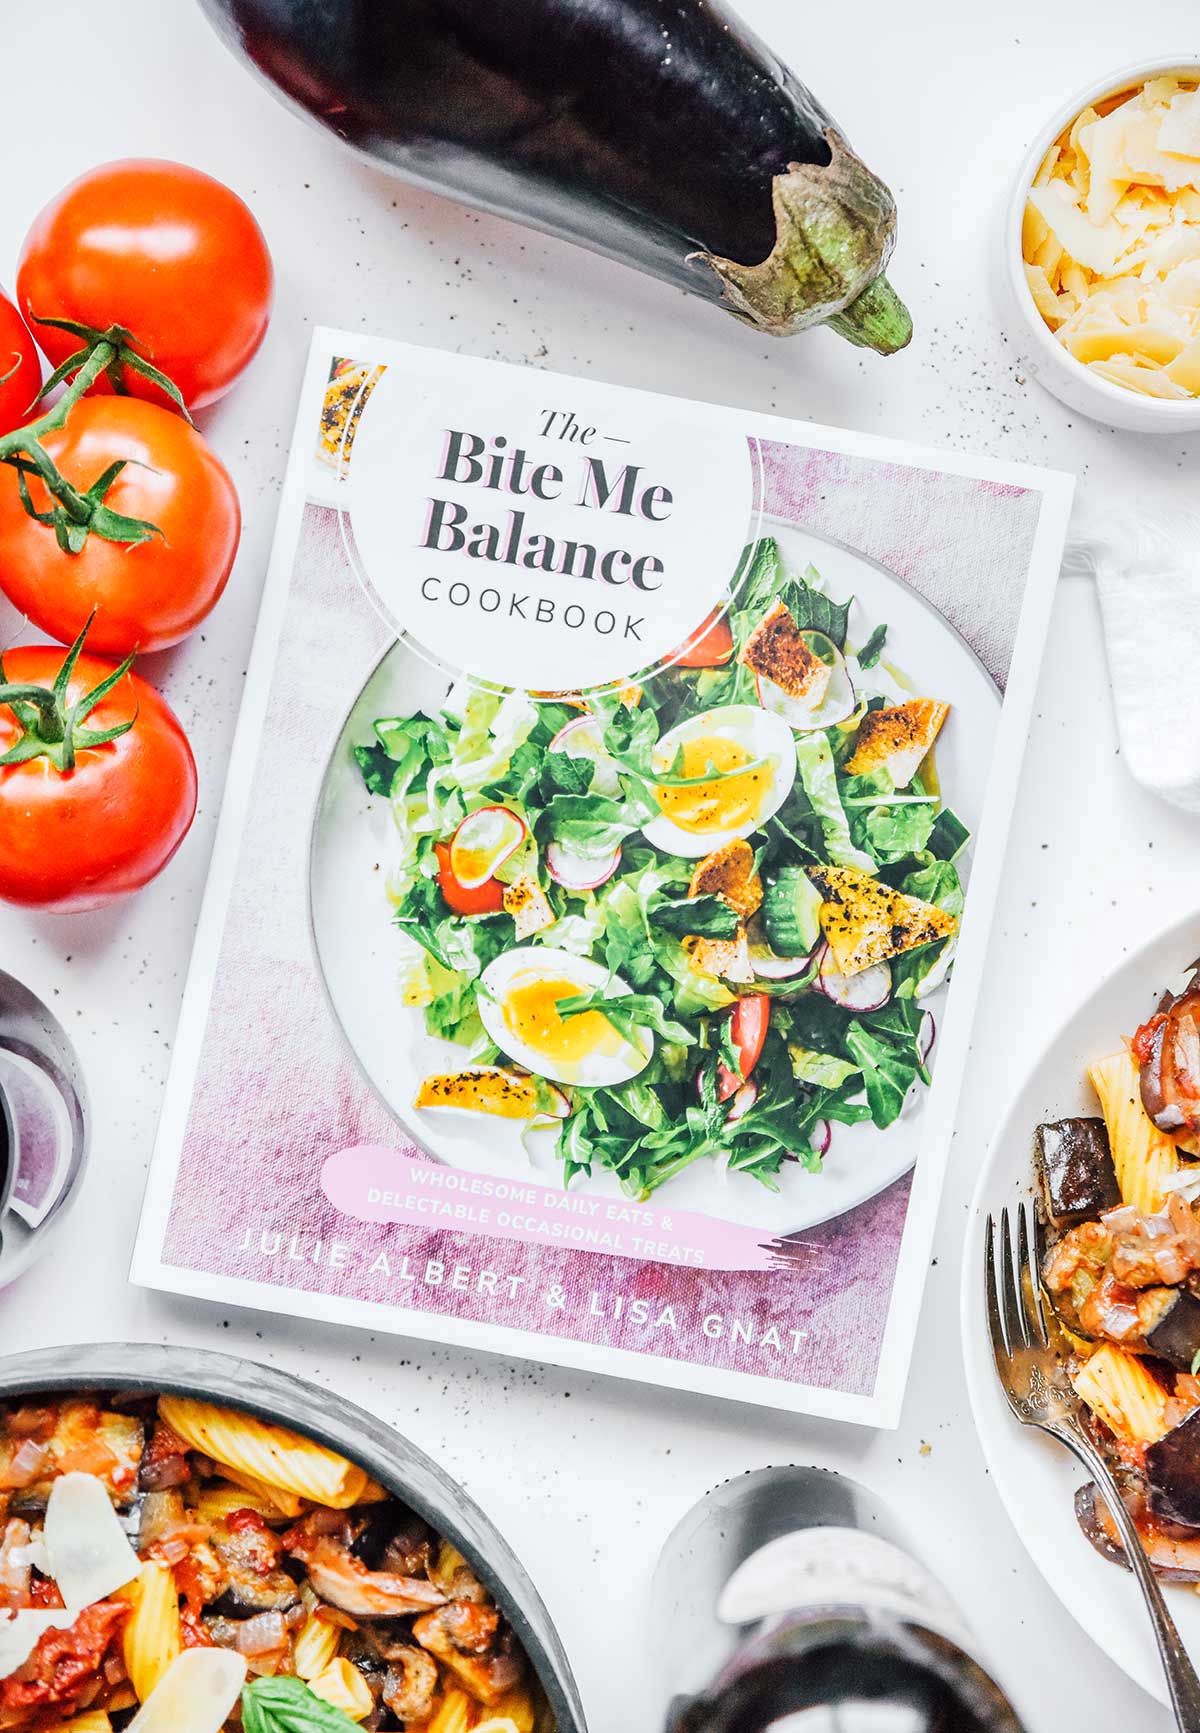 "The Bite Me Balance Cookbook" surrounded by dishes of vegetable bolognese and various ingredients